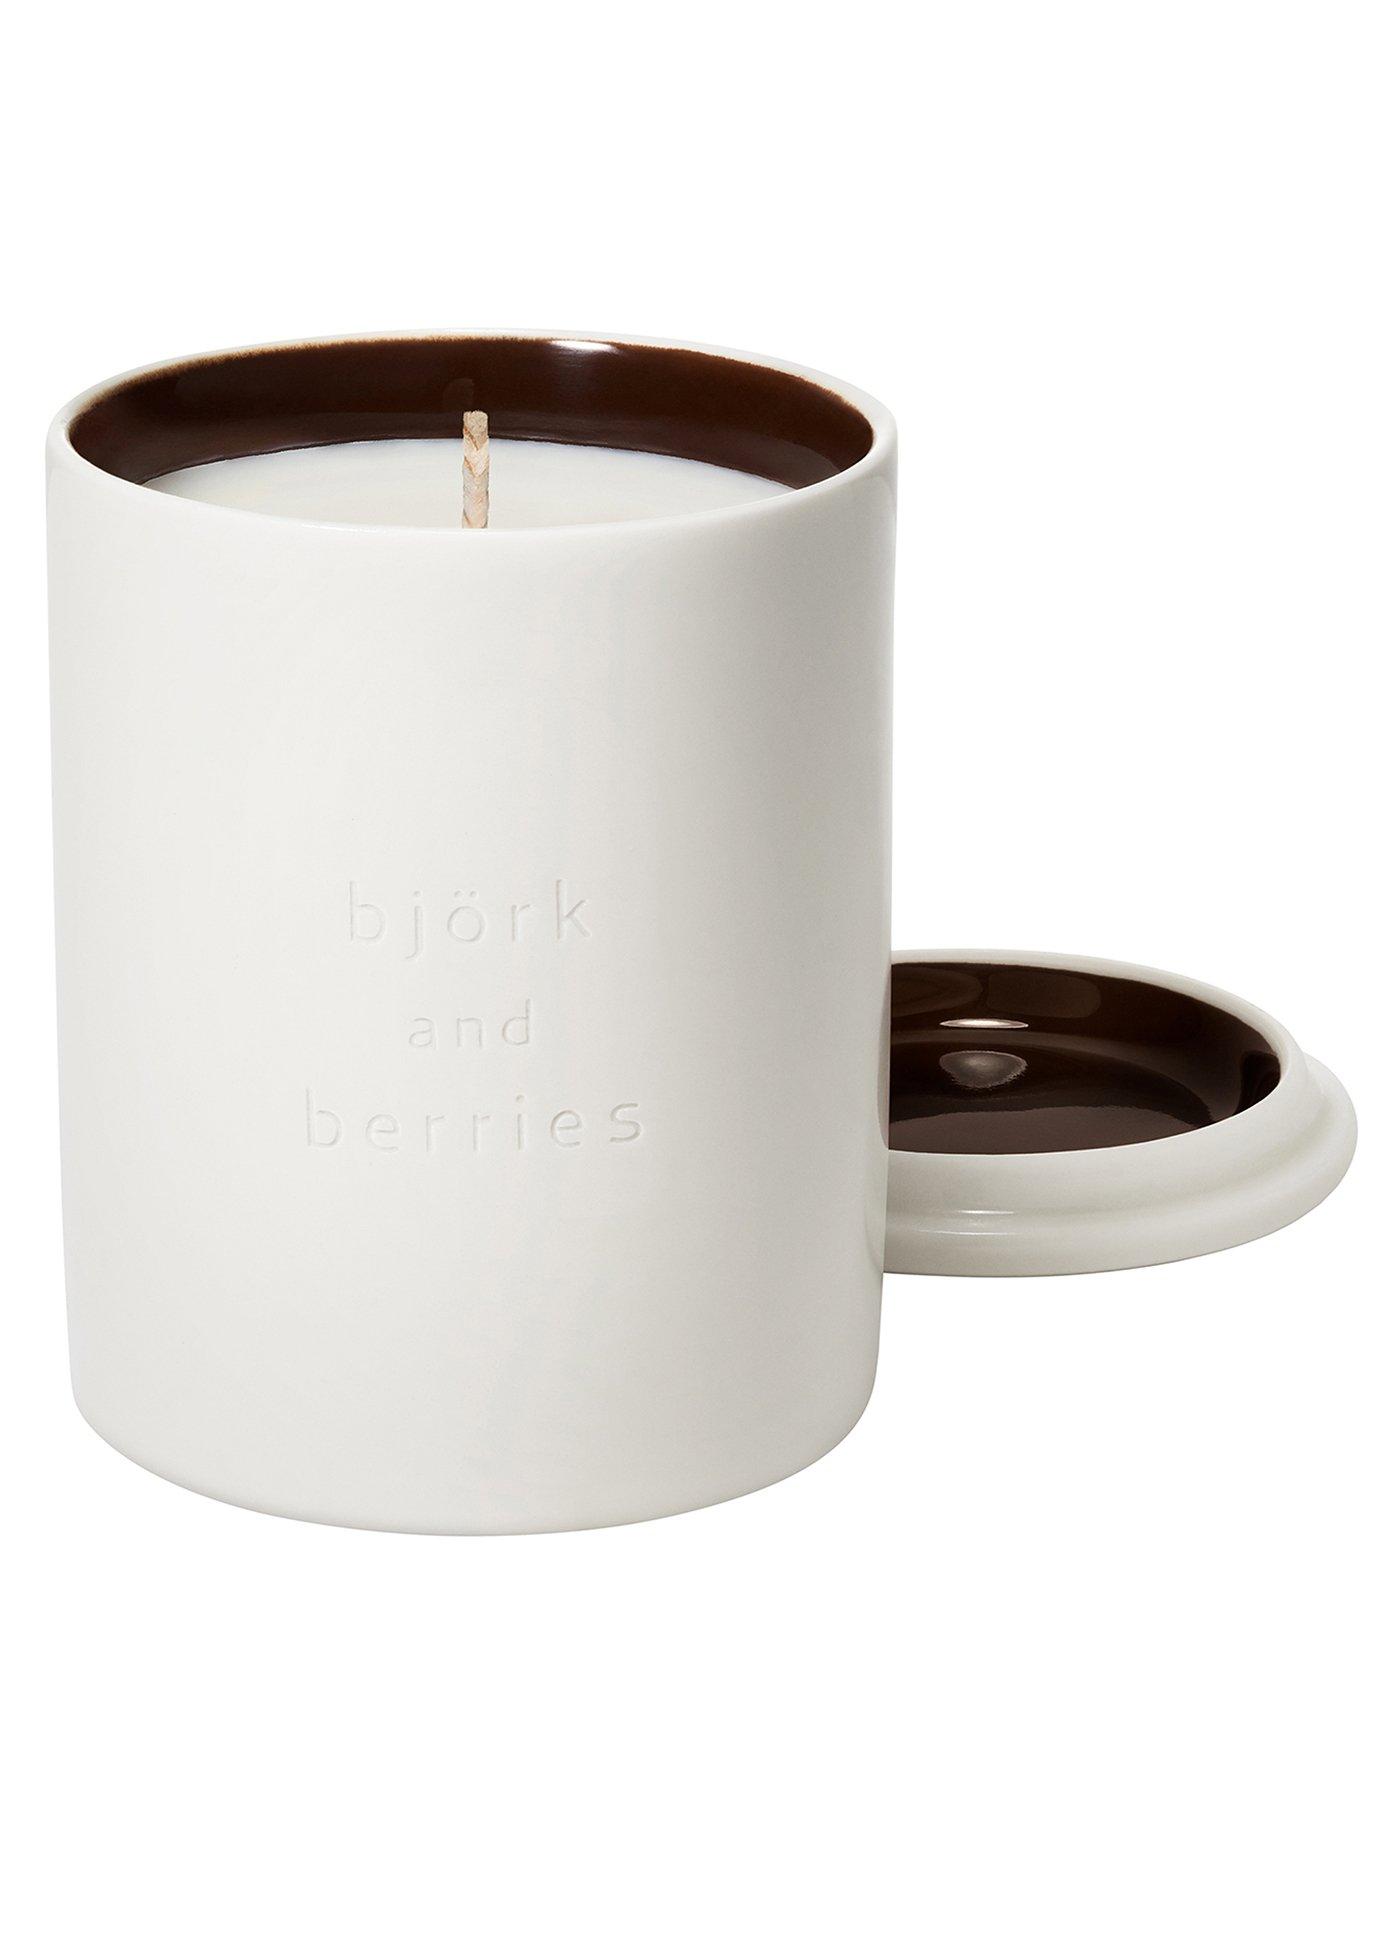 Björk & Berries Kerzen White Forest Scented Candle  